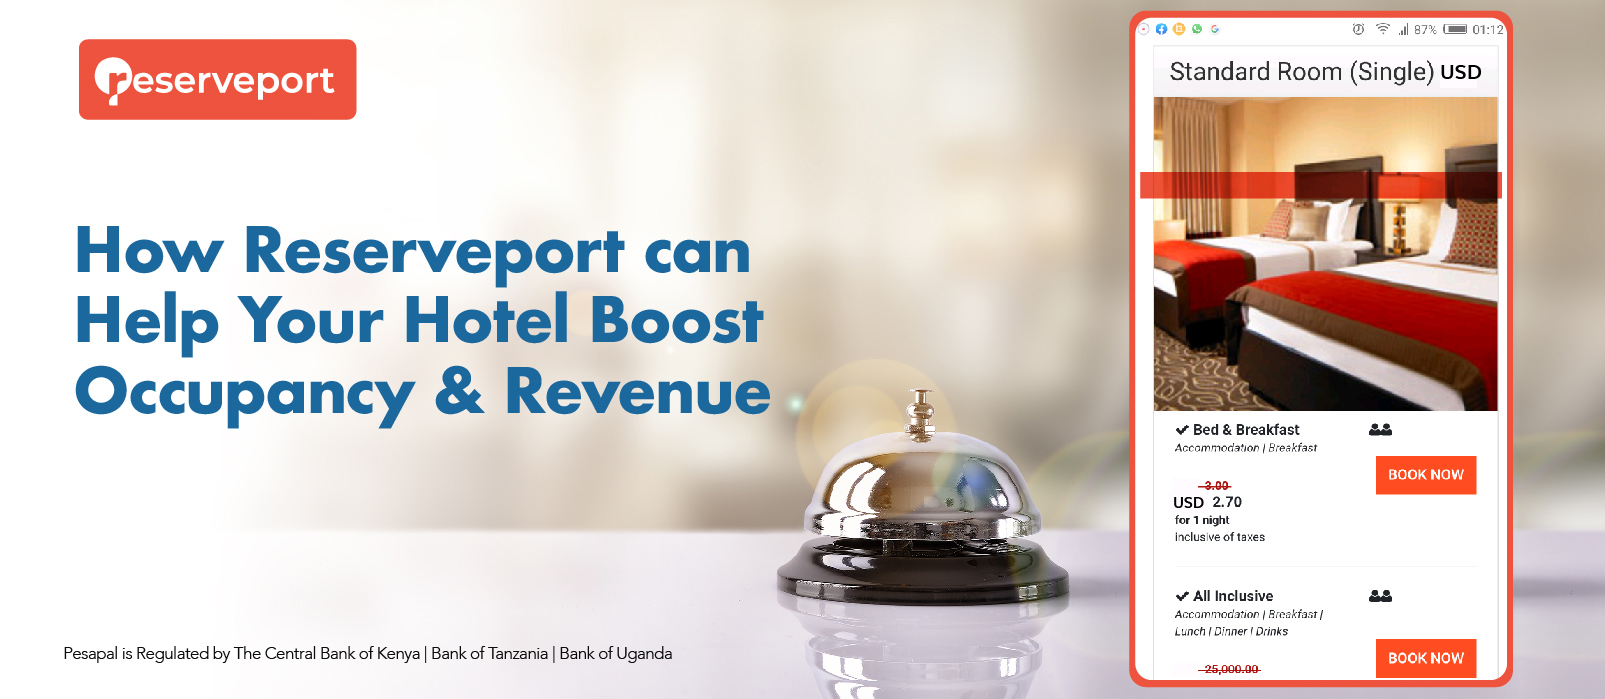 How Reserveport Can Help Your Hotel Boost Occupancy and Revenue